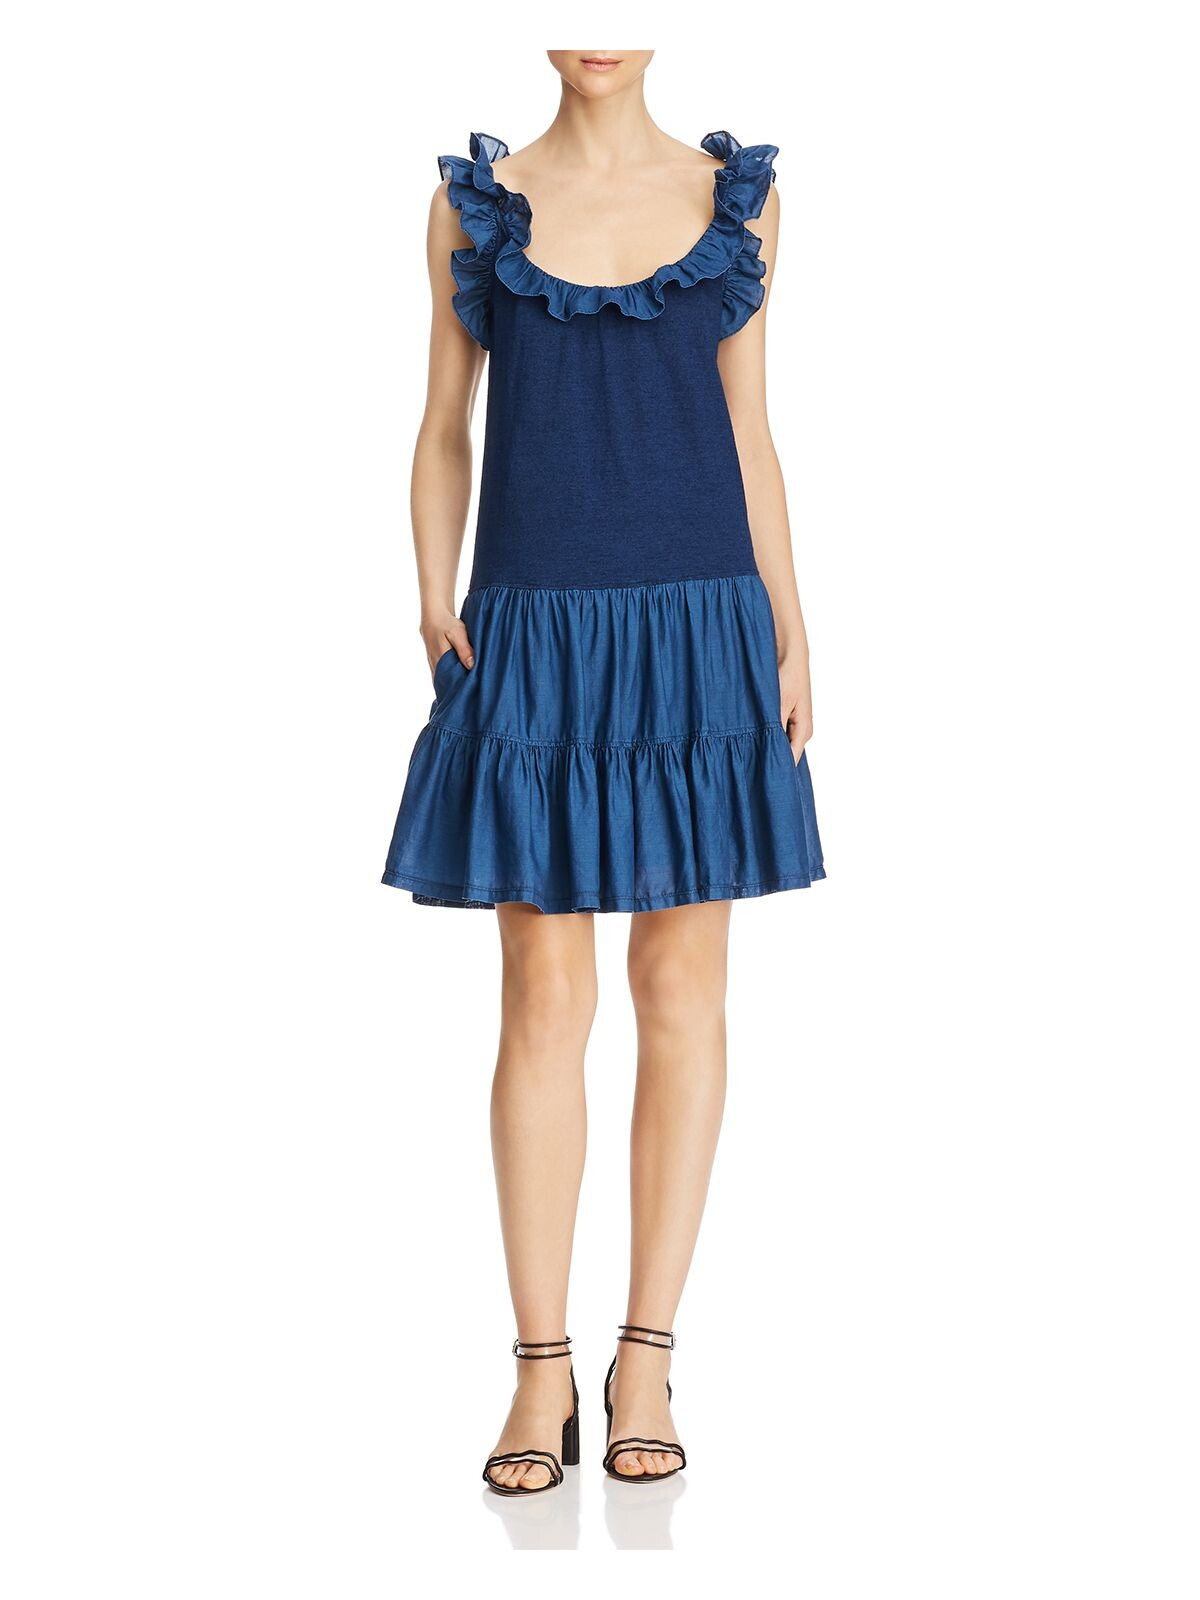 LA VIE BY REBECCA TAYLOR Womens Blue Low Back Heather Spaghetti Strap Scoop Neck Above The Knee Party Trapeze Dress M